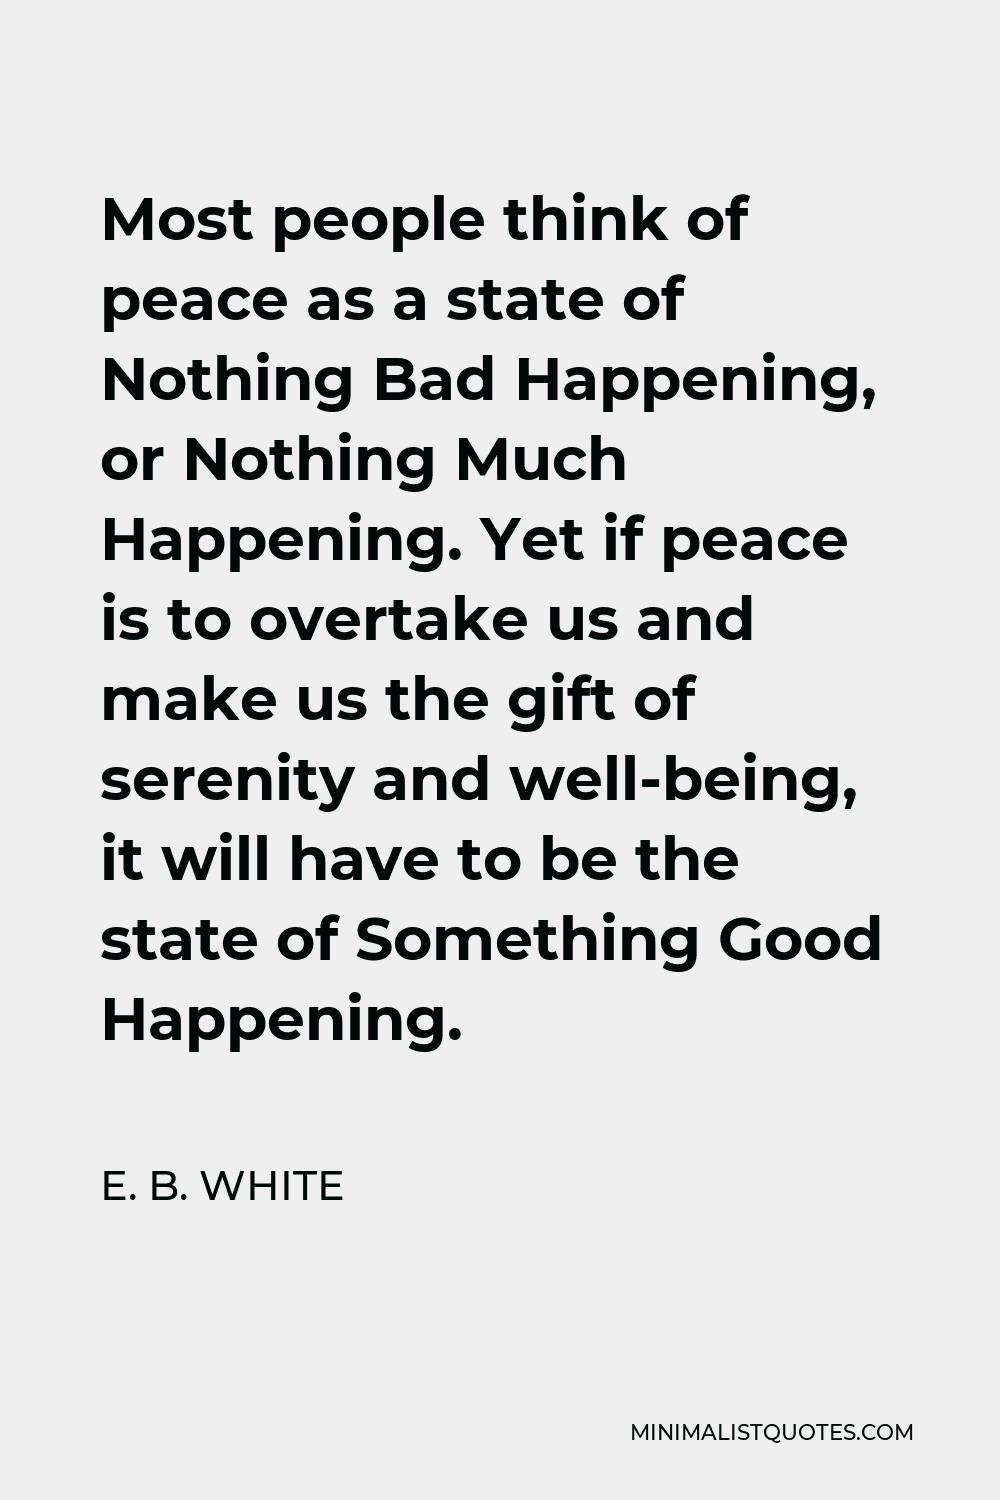 E. B. White Quote - Most people think of peace as a state of Nothing Bad Happening, or Nothing Much Happening. Yet if peace is to overtake us and make us the gift of serenity and well-being, it will have to be the state of Something Good Happening.